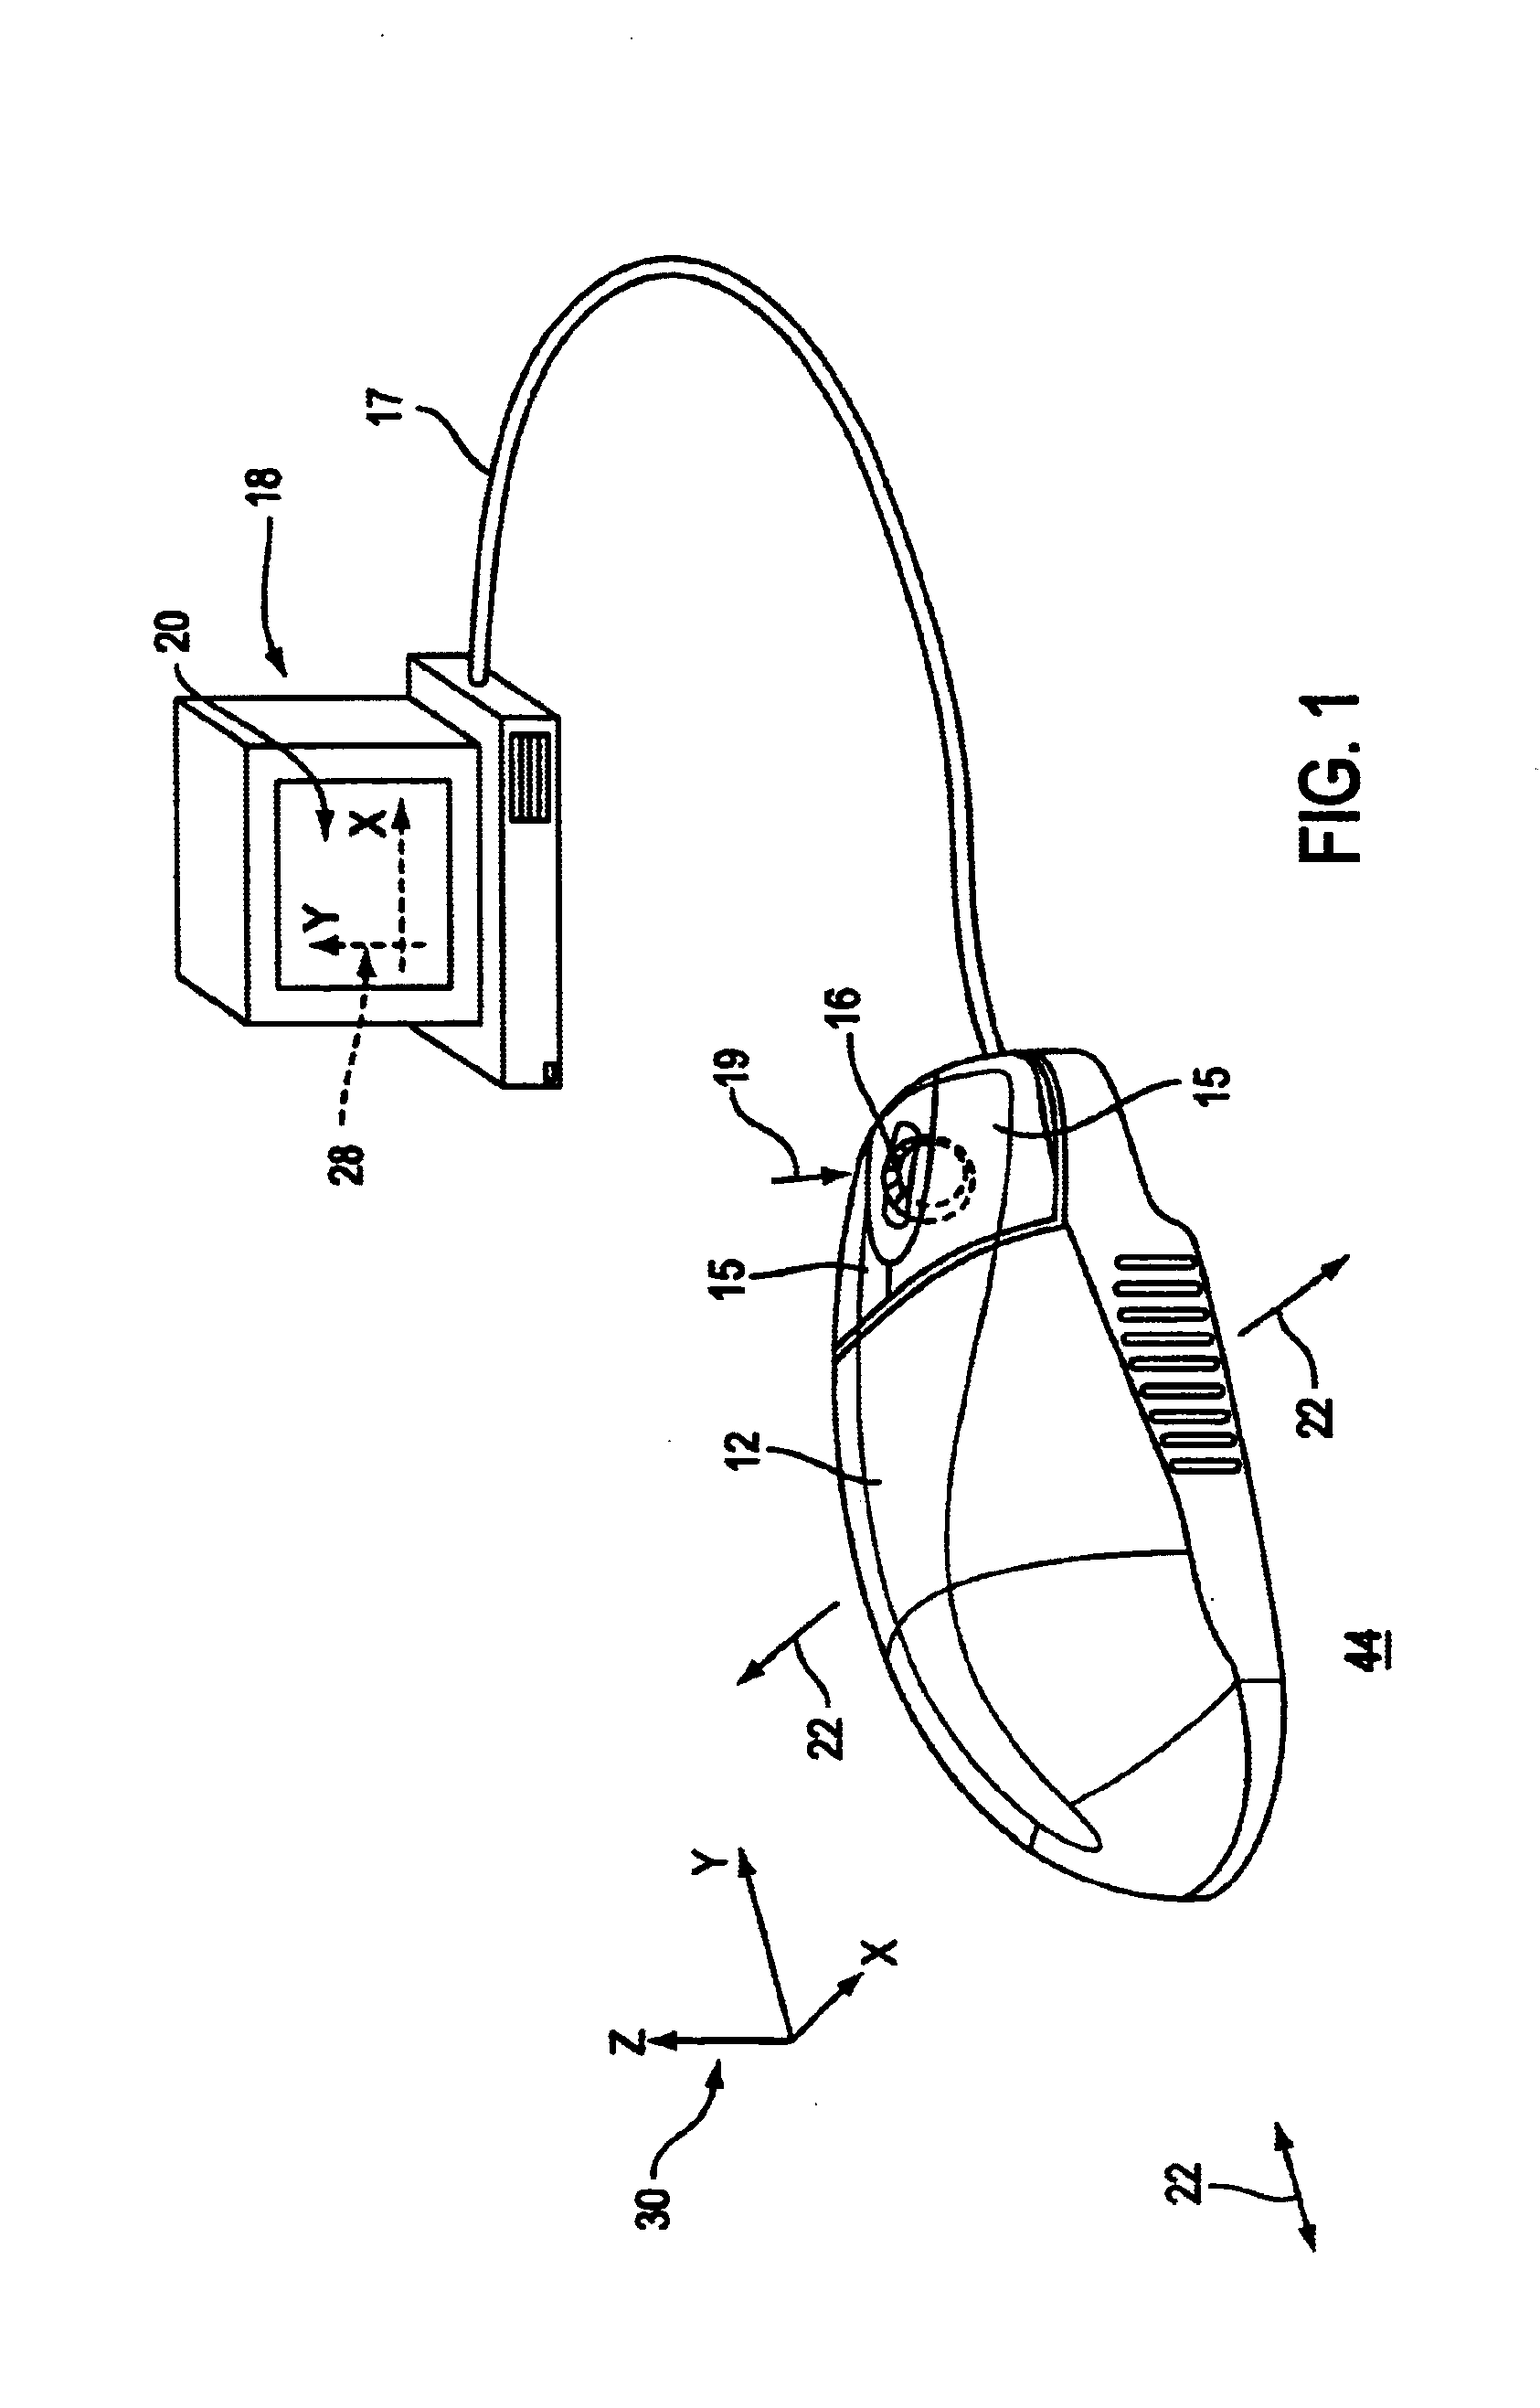 Rotary force feedback wheels for remote control devices